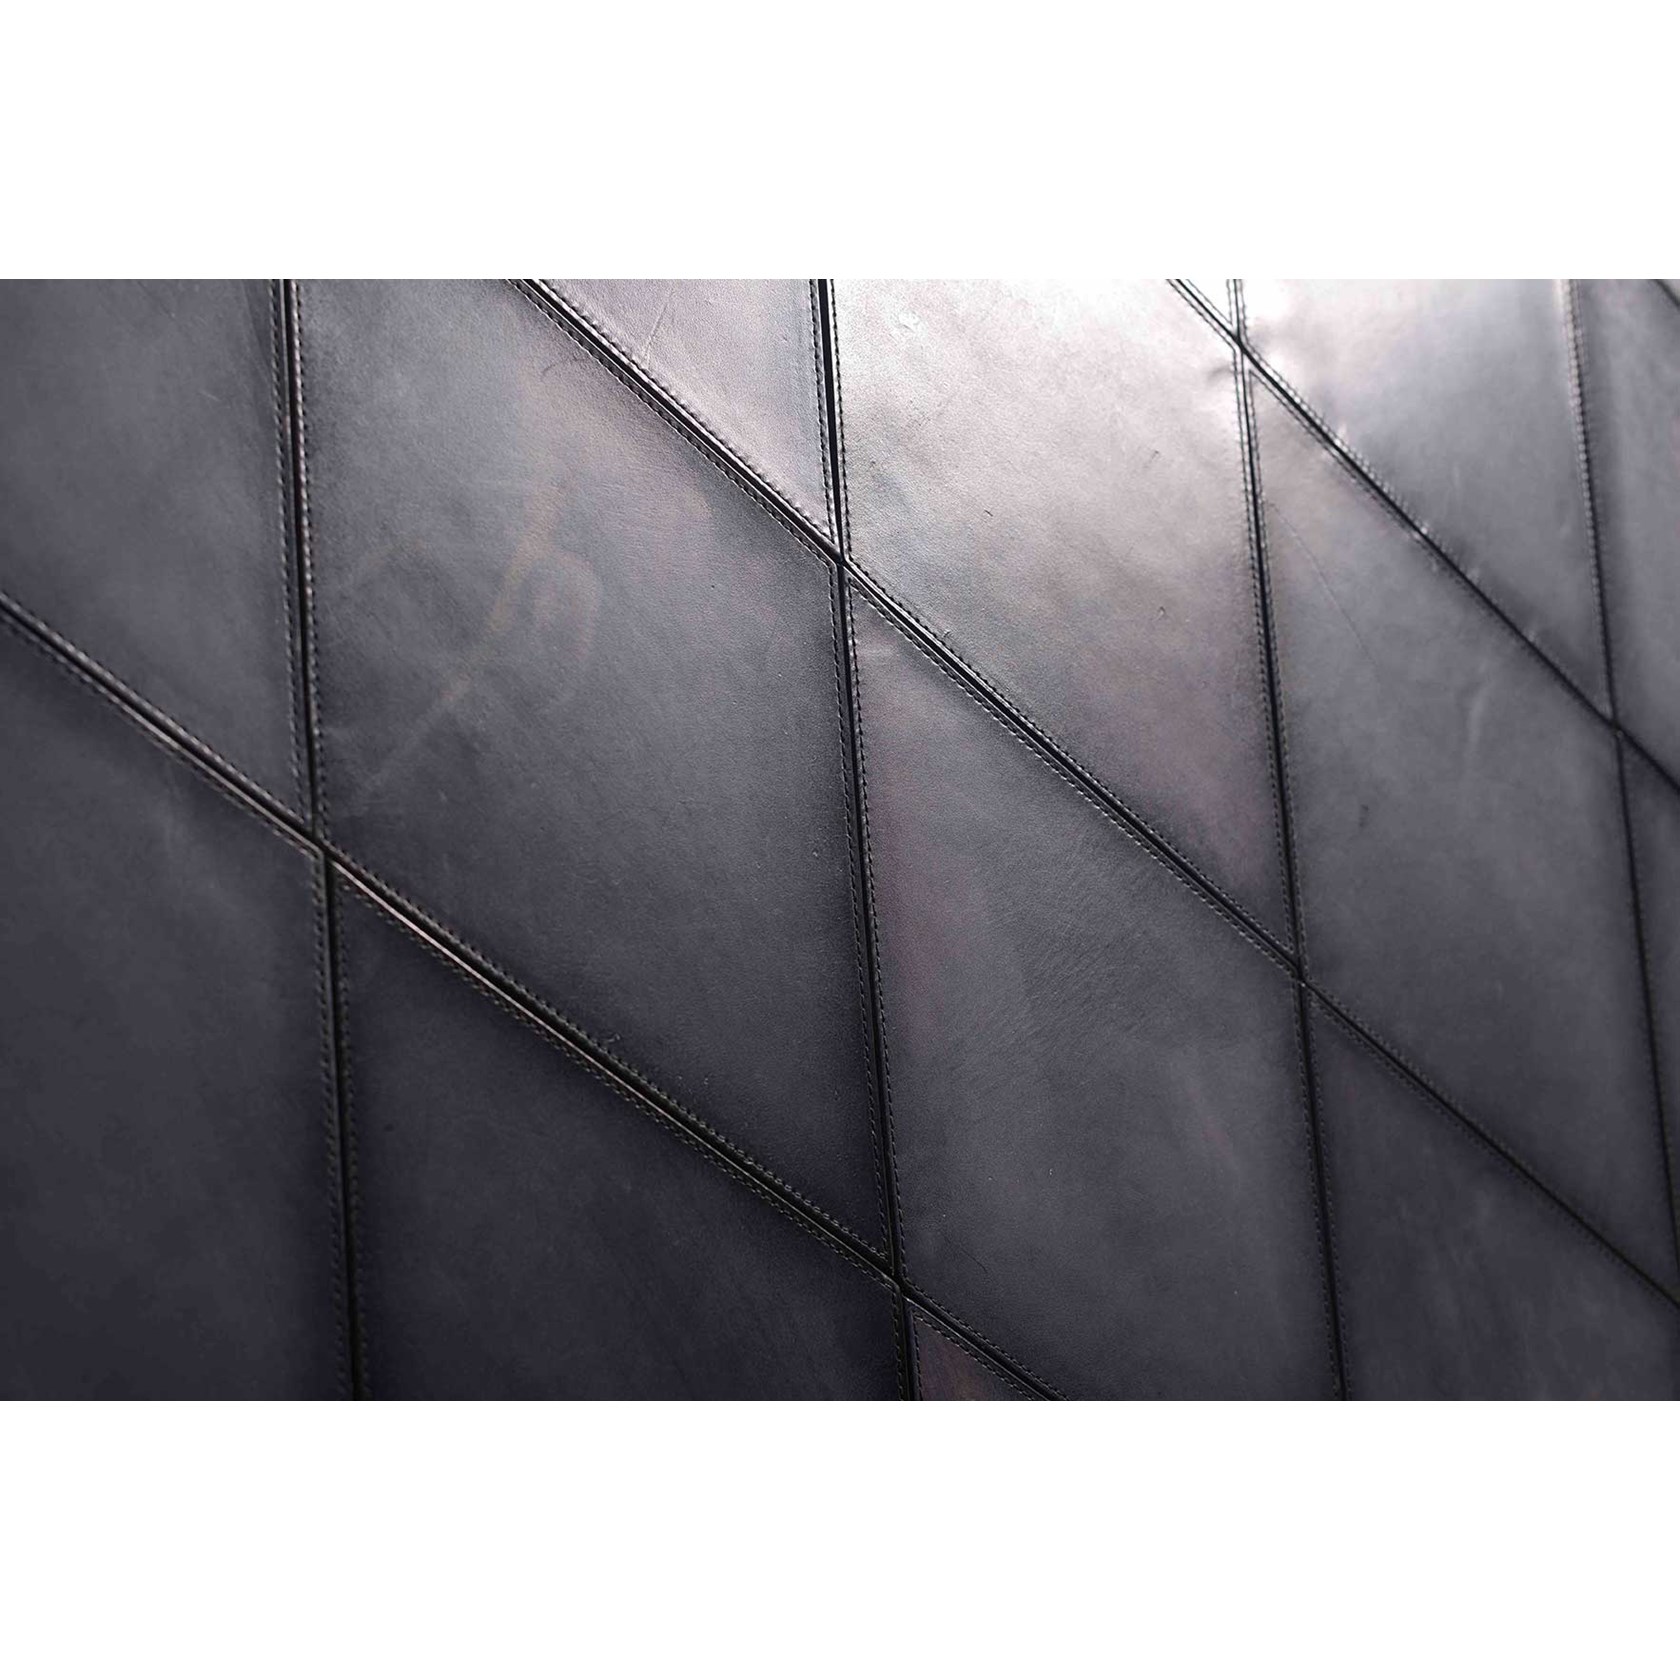 Leather Wall - Artistic Series